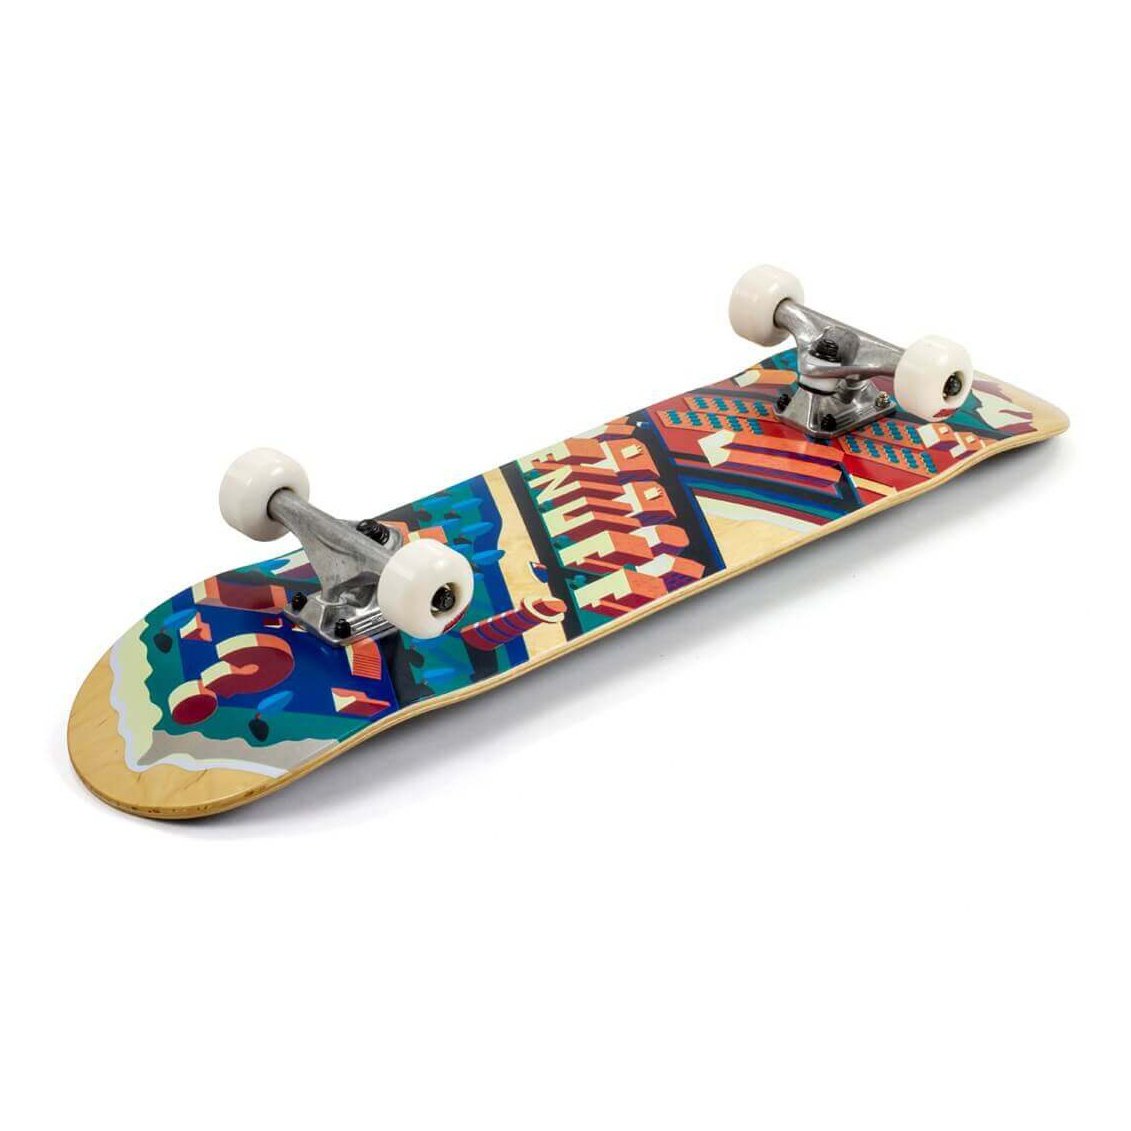 Enuff Isotown Natural Complete Skateboard 7.75"